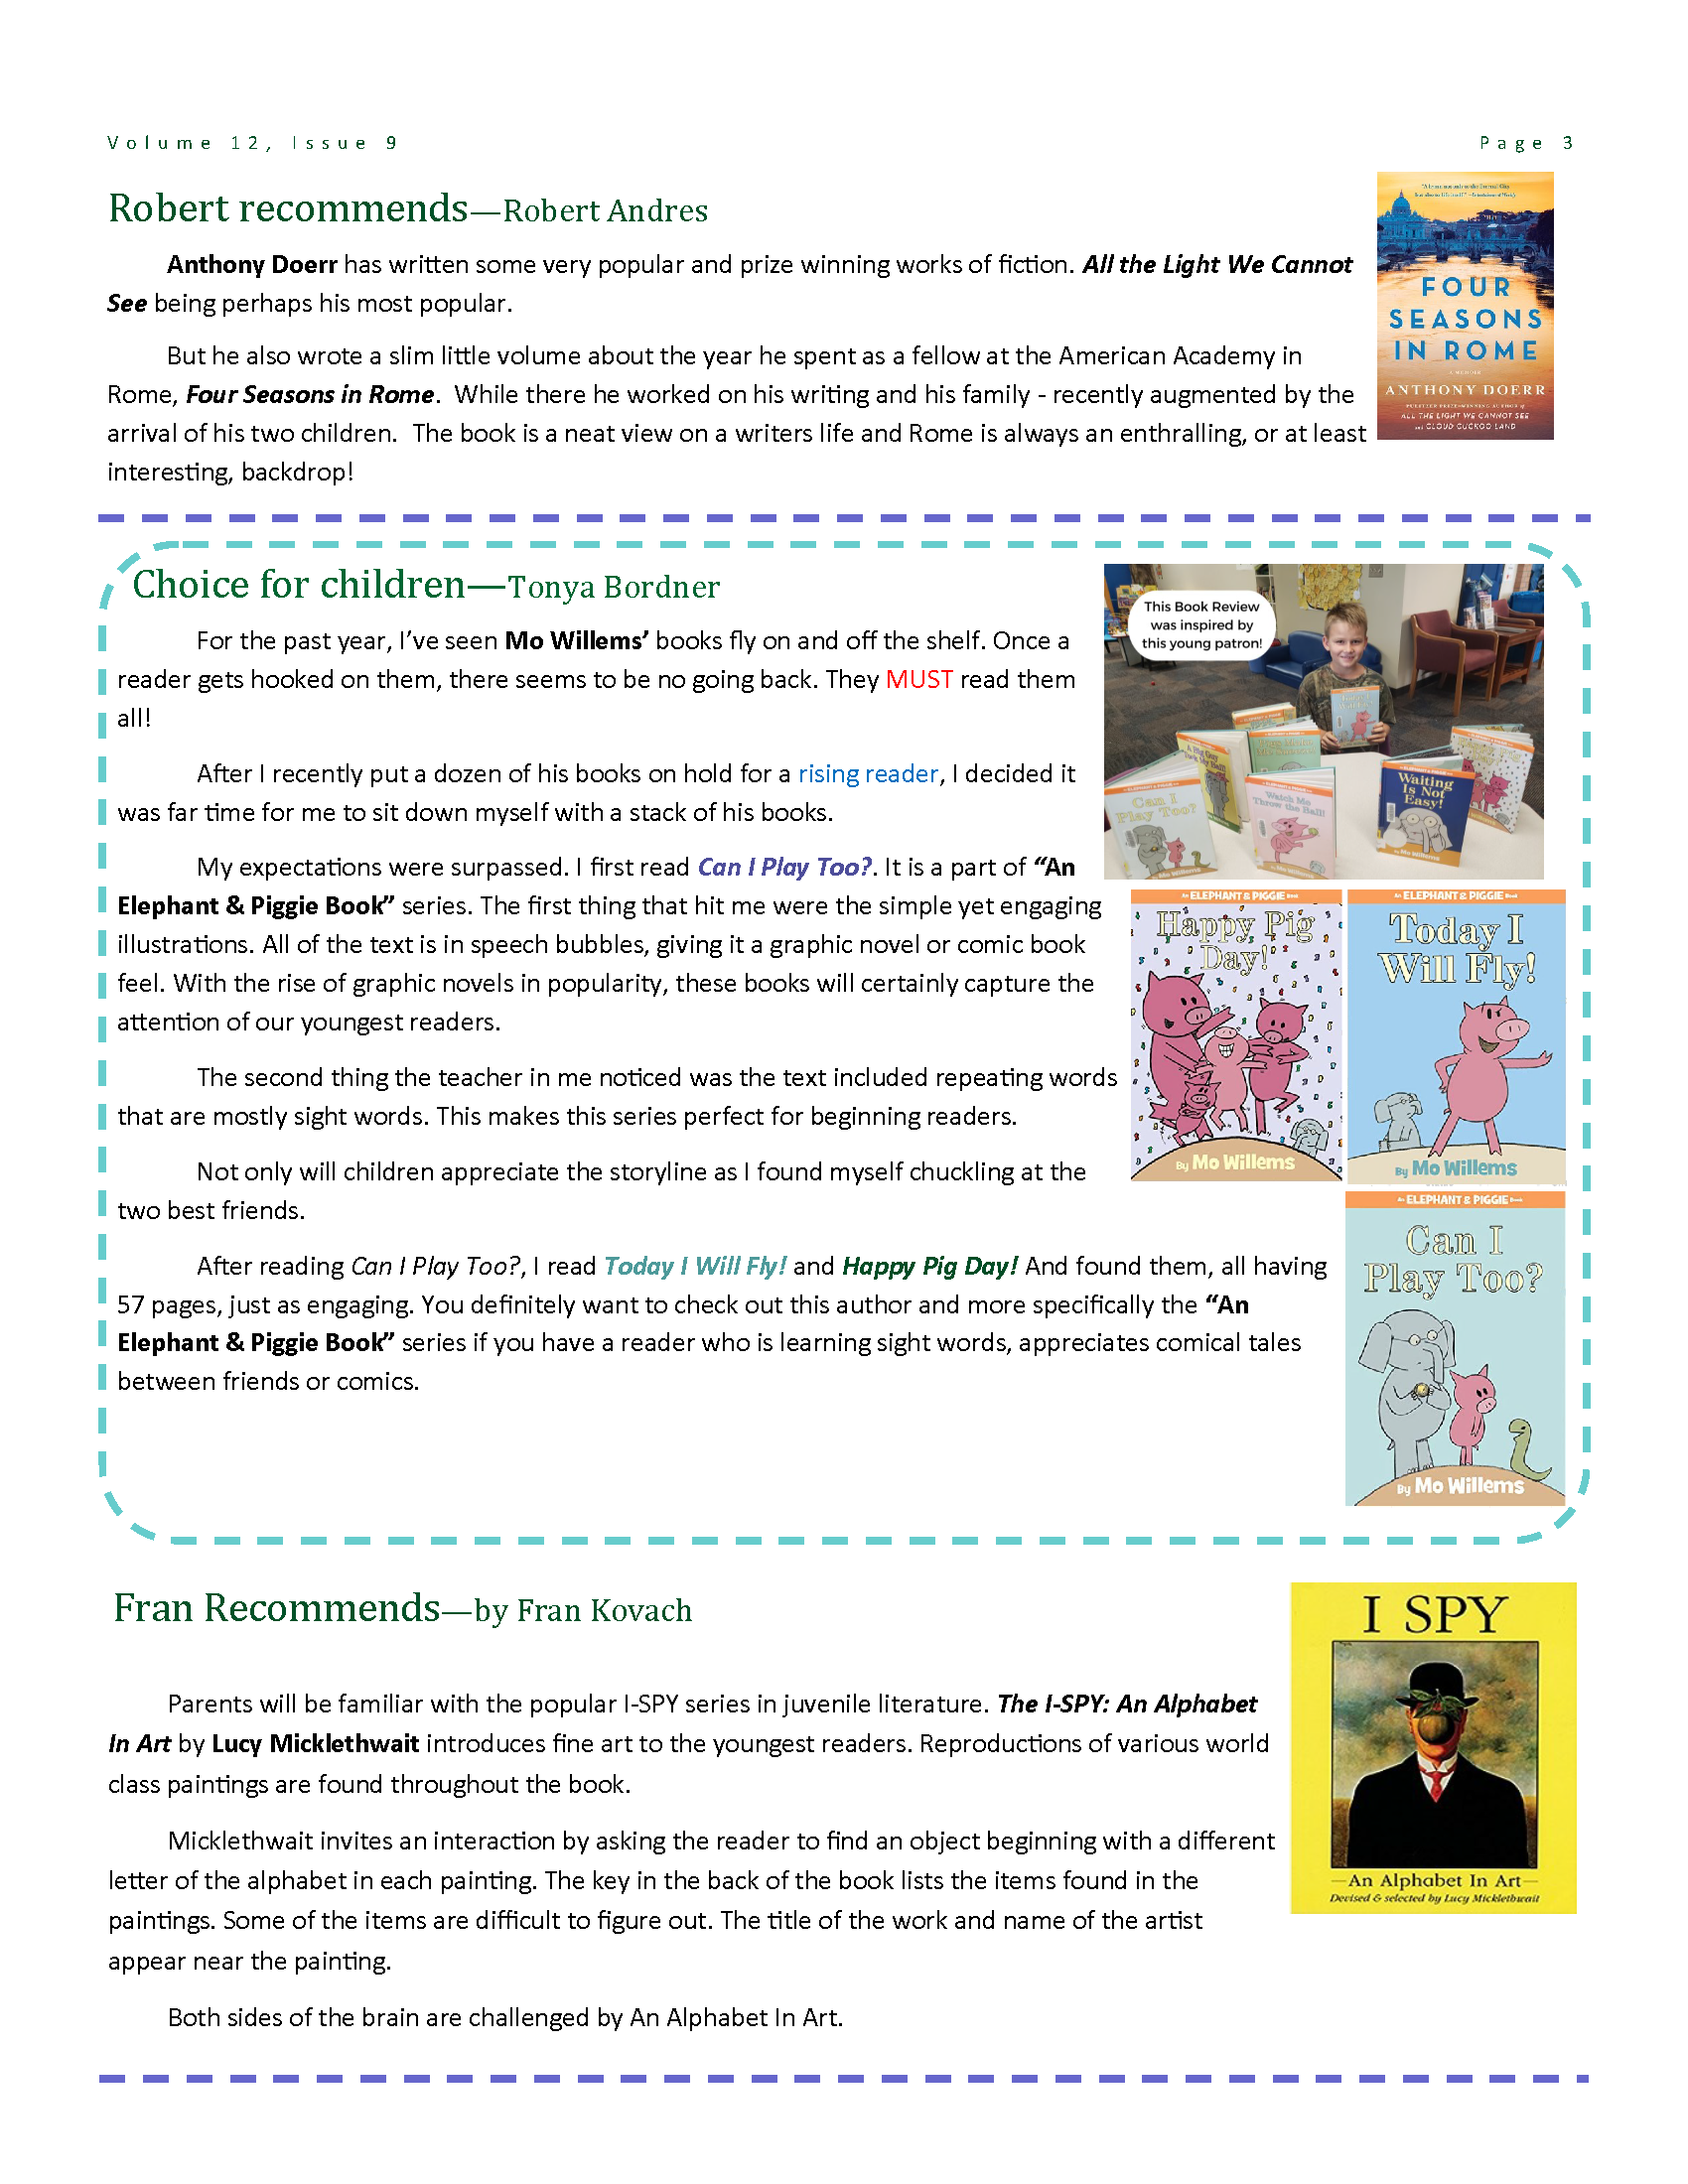 Page 3 of the newsletter